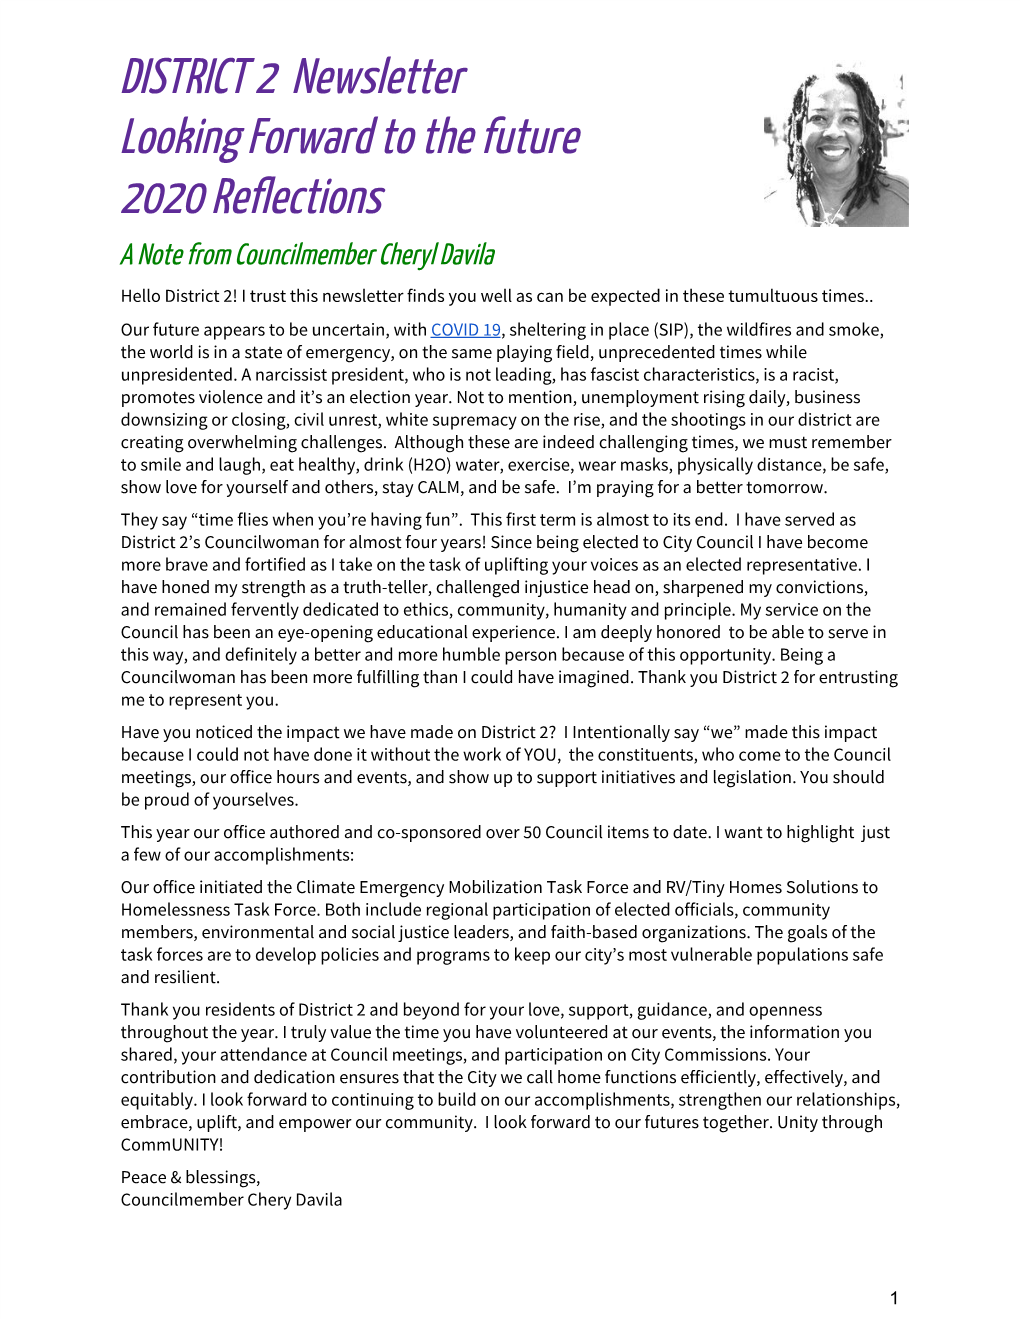 DISTRICT 2 Newsletter Looking Forward to the Future 2020 Reflections a Note from Councilmember Cheryl Davila